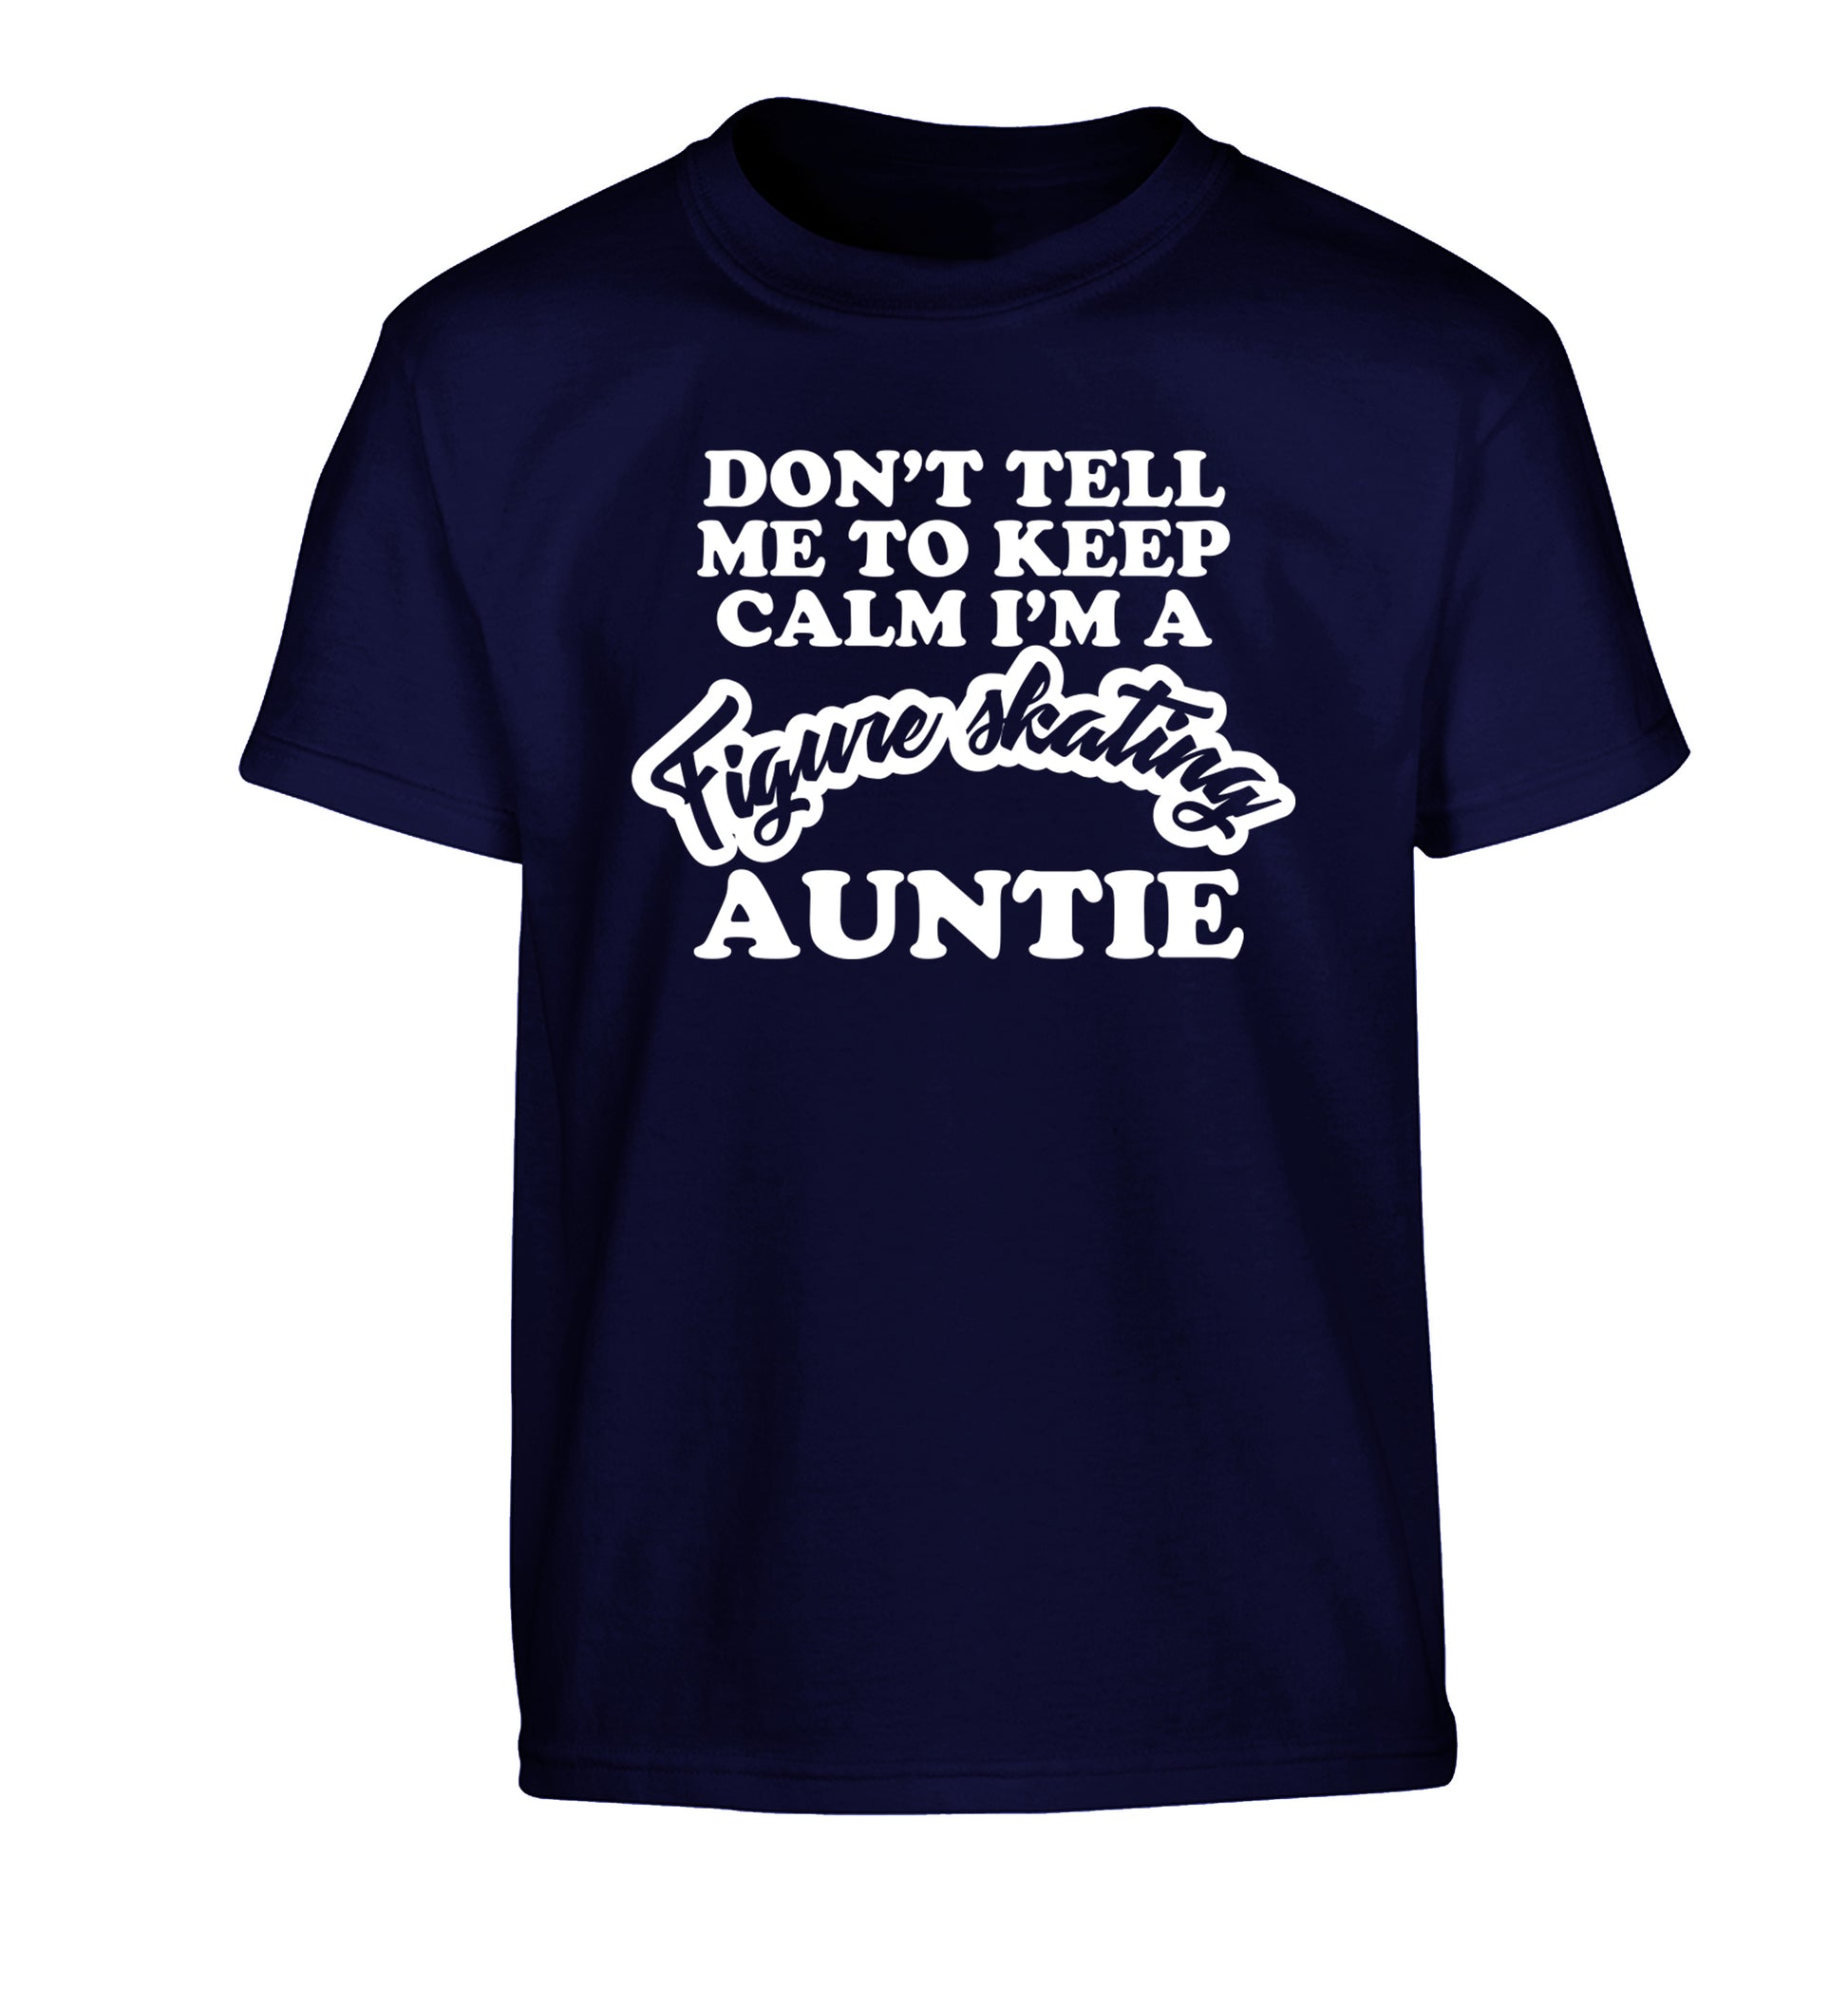 Don't tell me to keep calm I'm a figure skating auntie Children's navy Tshirt 12-14 Years